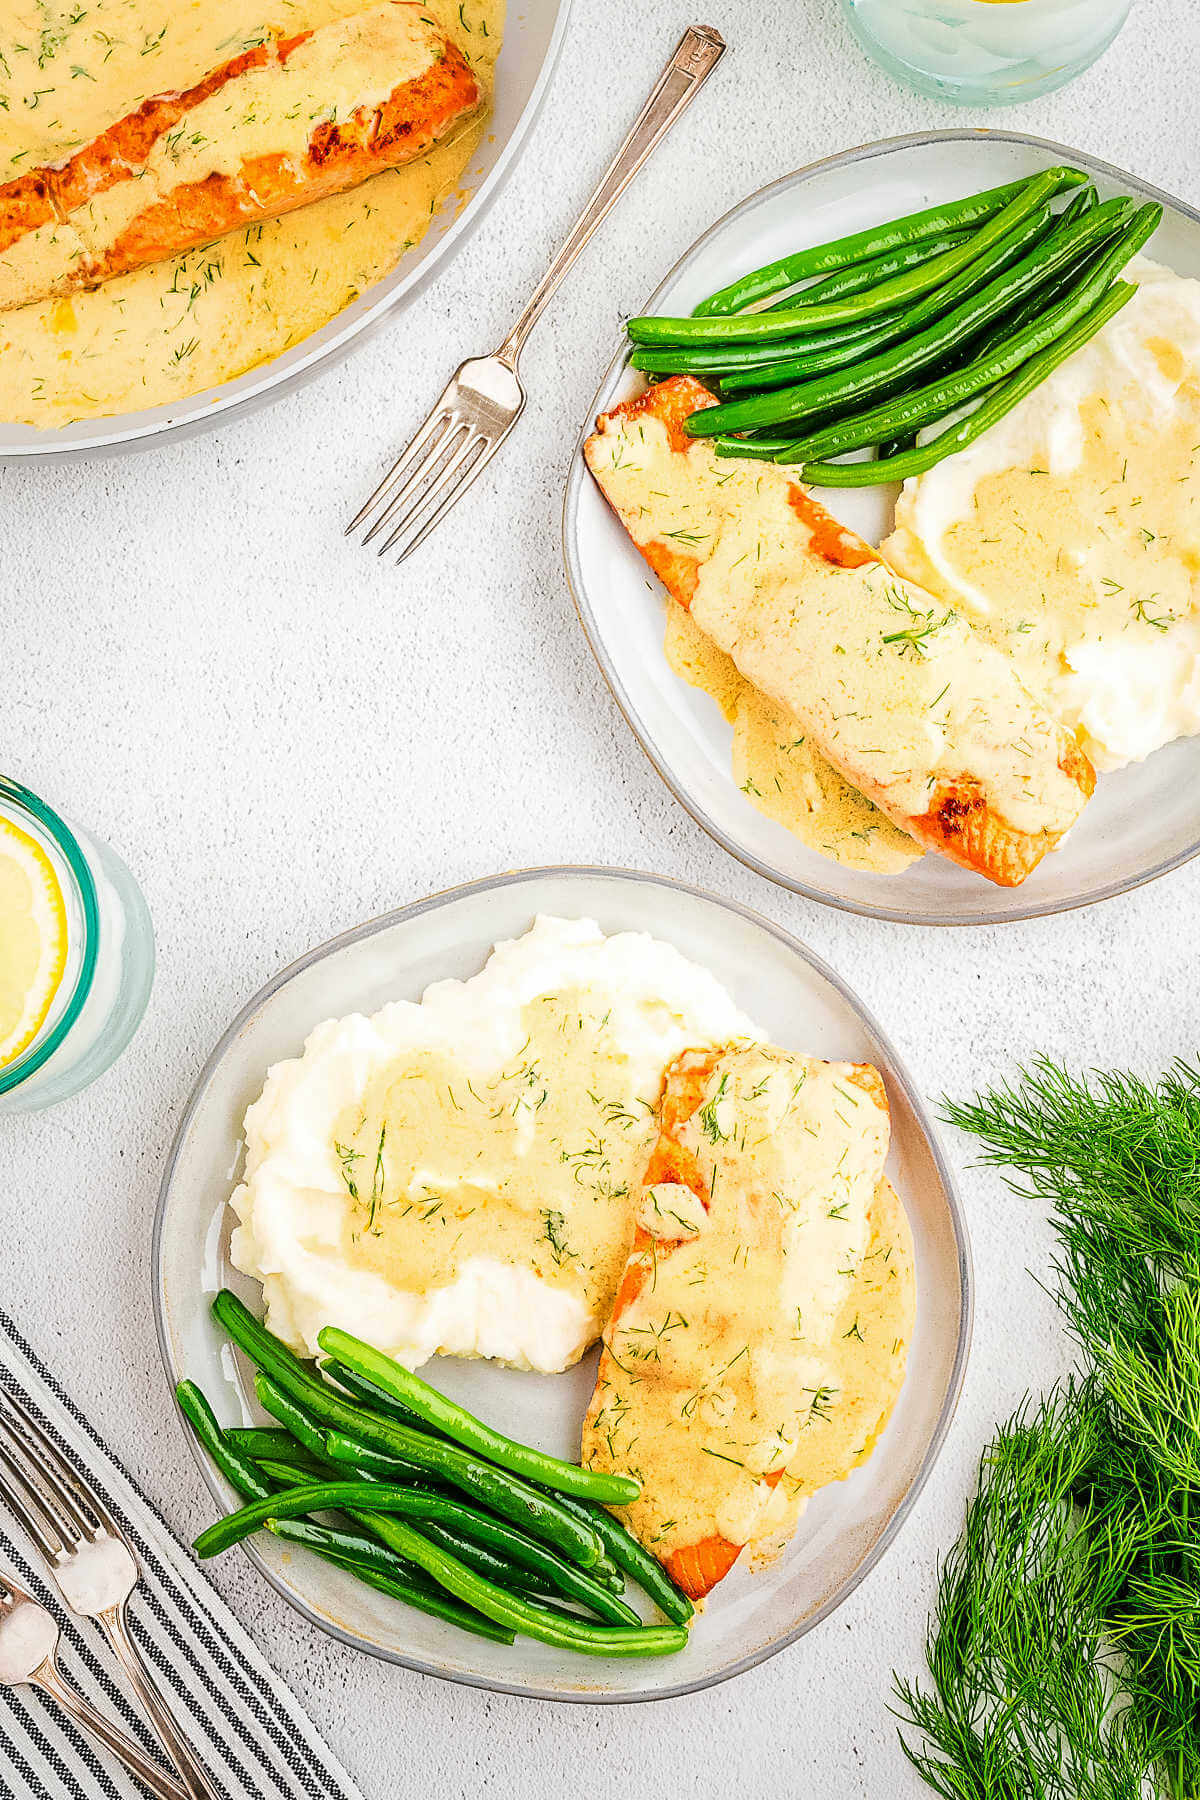 A dinner table set with plates of salmon, mashed potatoes, and green beans.